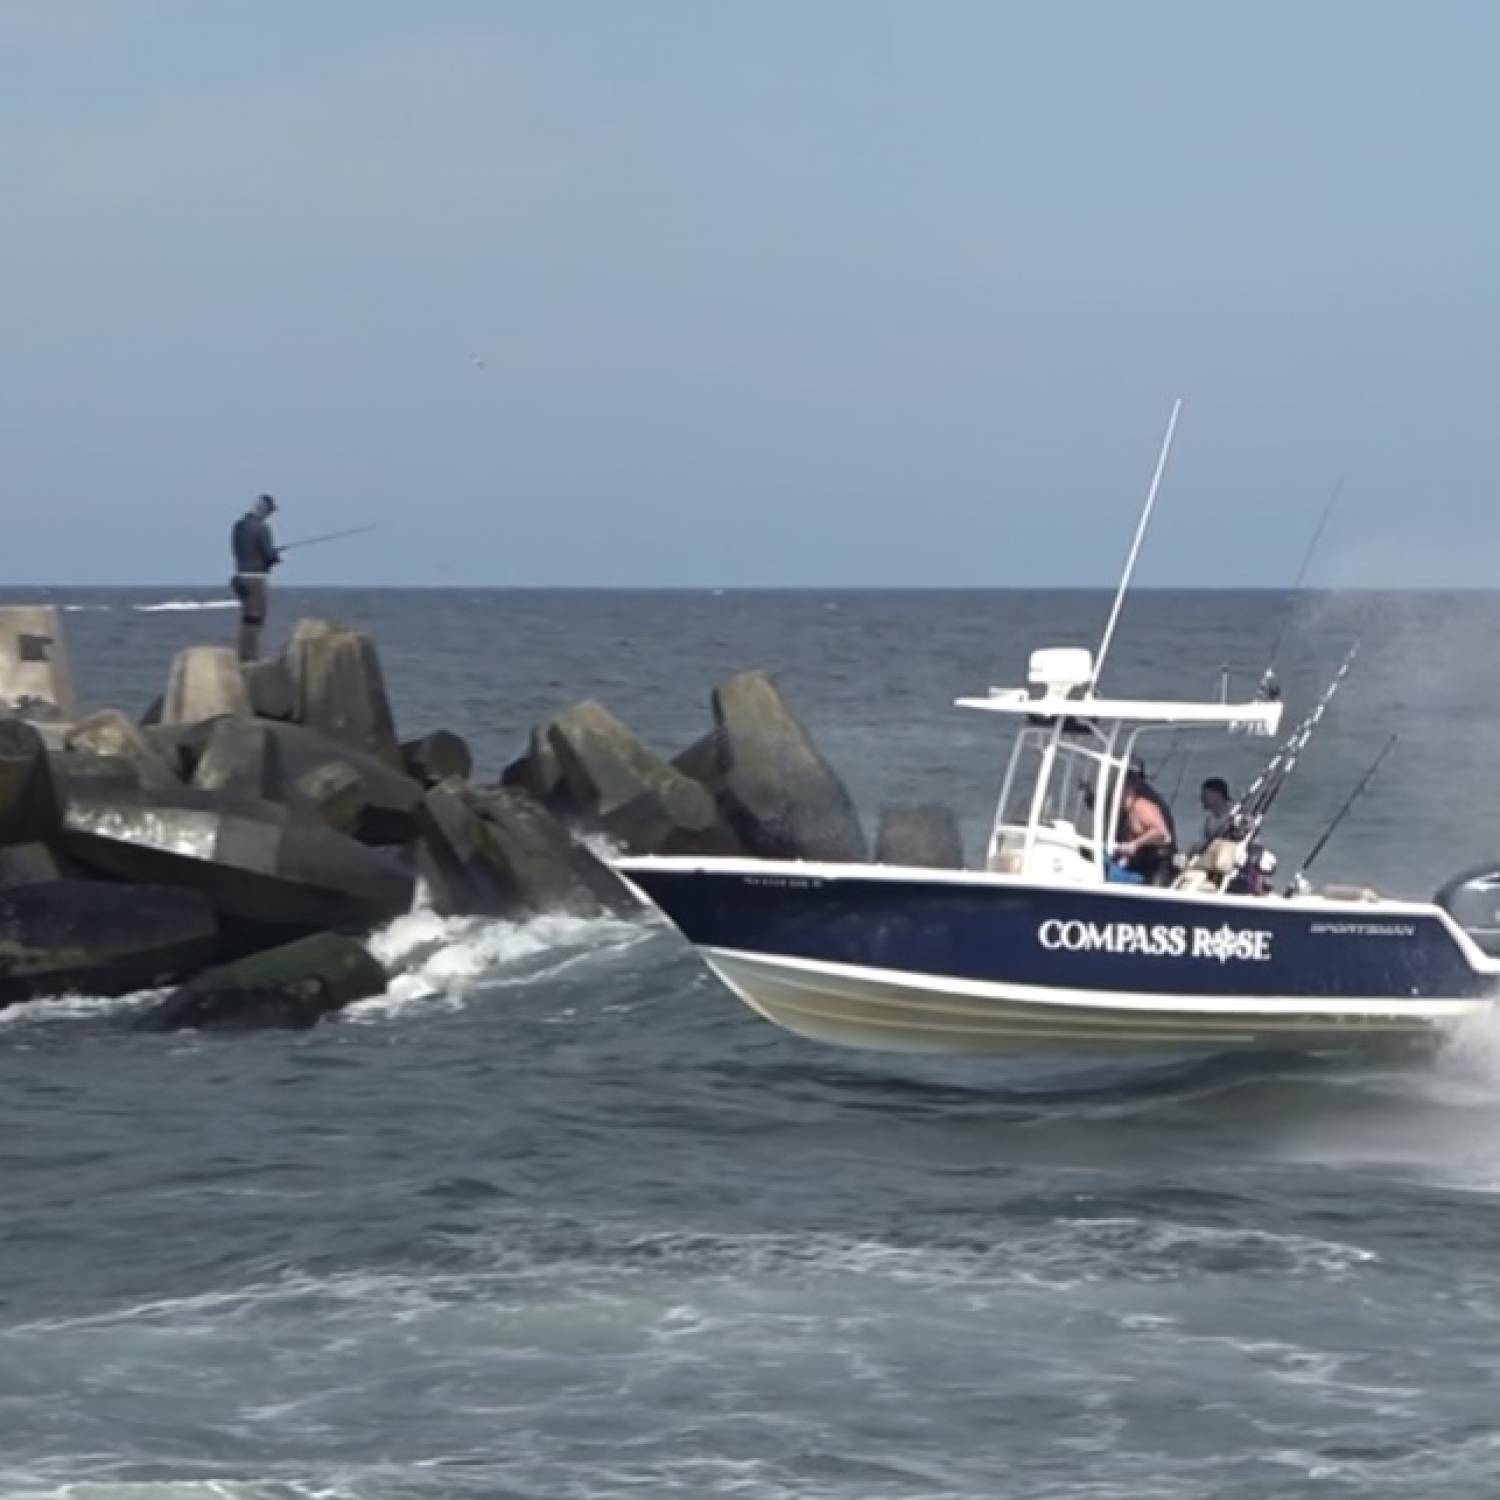 Title: Full Send Sportsman - On board their Sportsman Open 232 Center Console - Location: Manasquan Inlet. Participating in the Photo Contest #SportsmanOctober2021